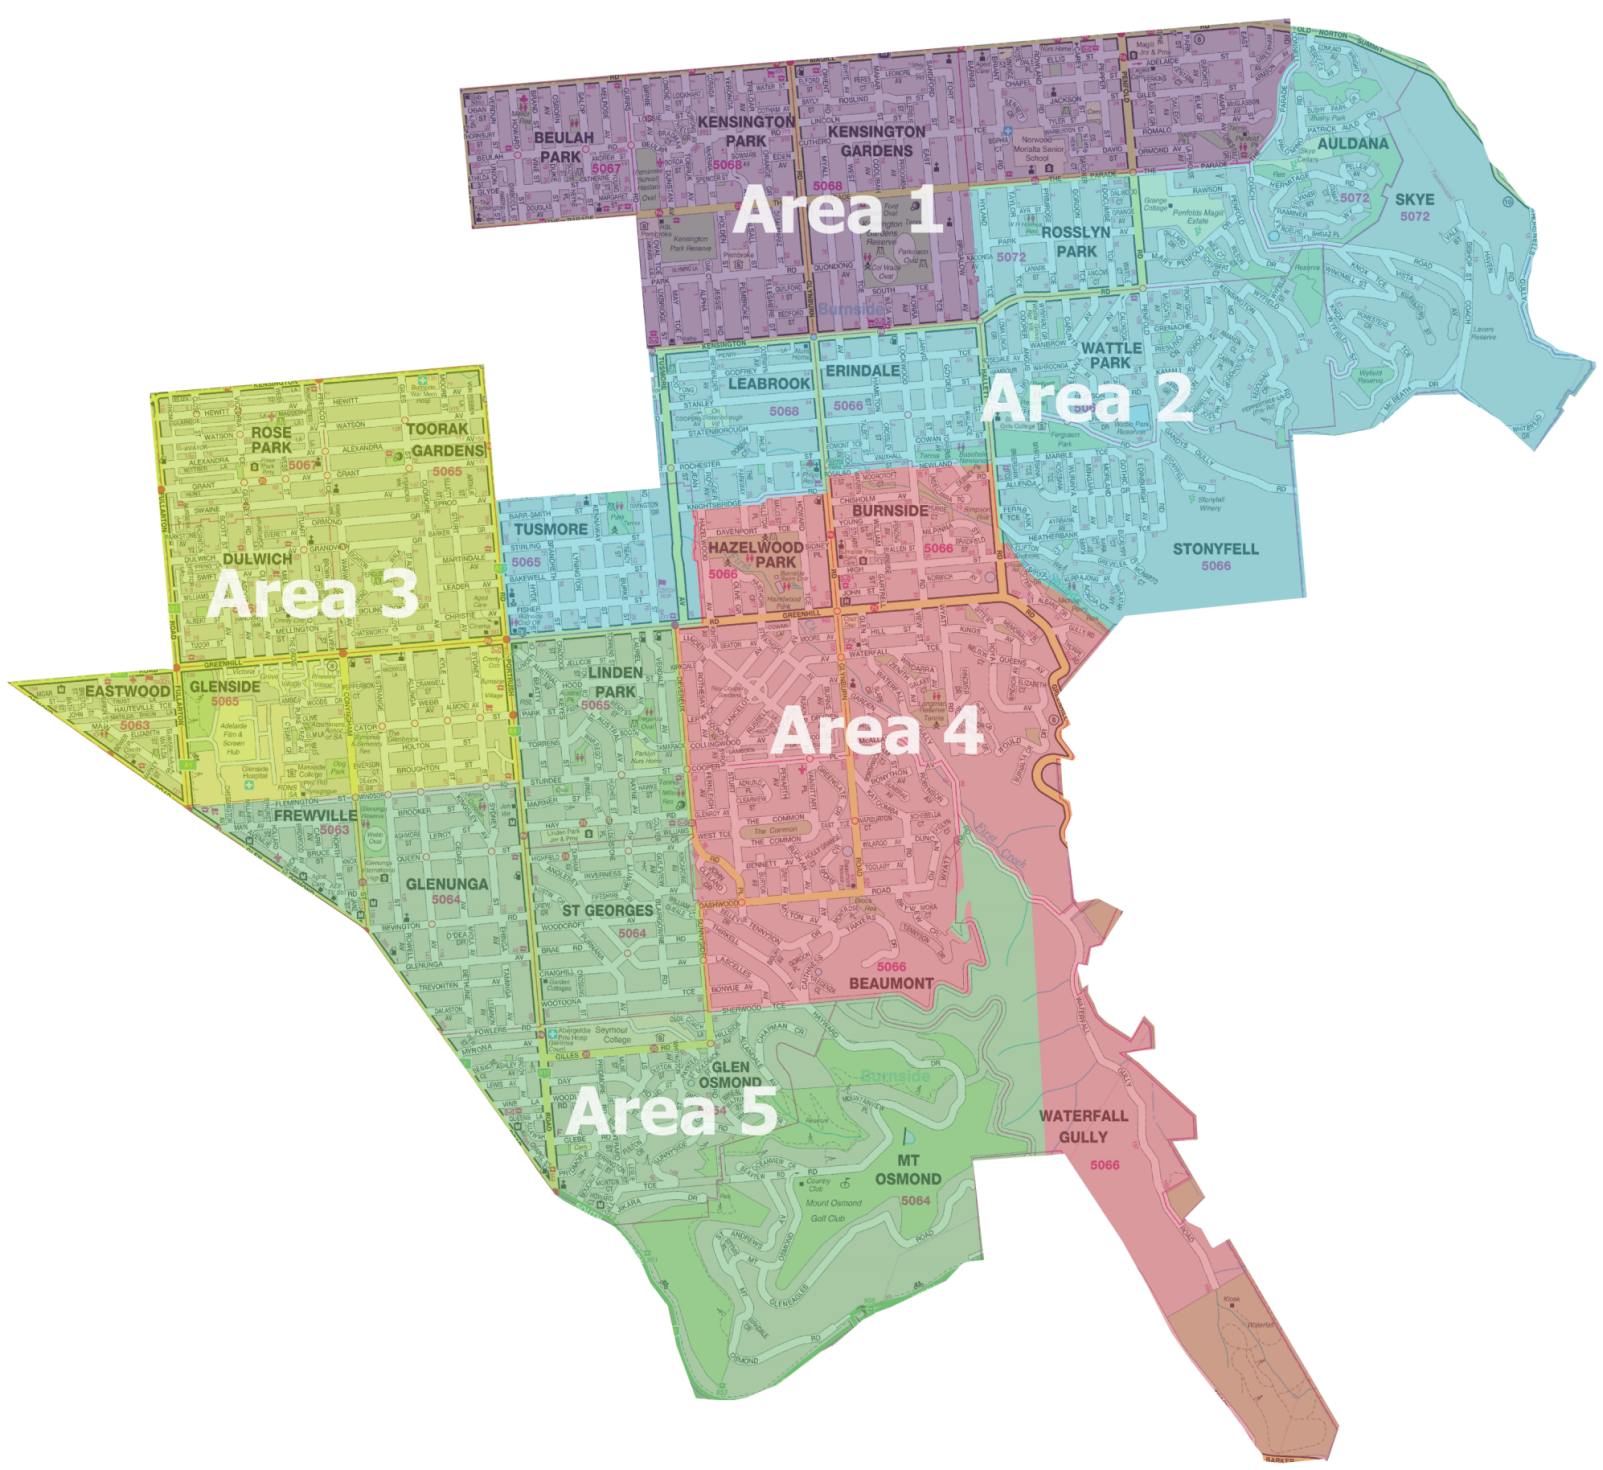 Waste collection areas in the City of Burnside